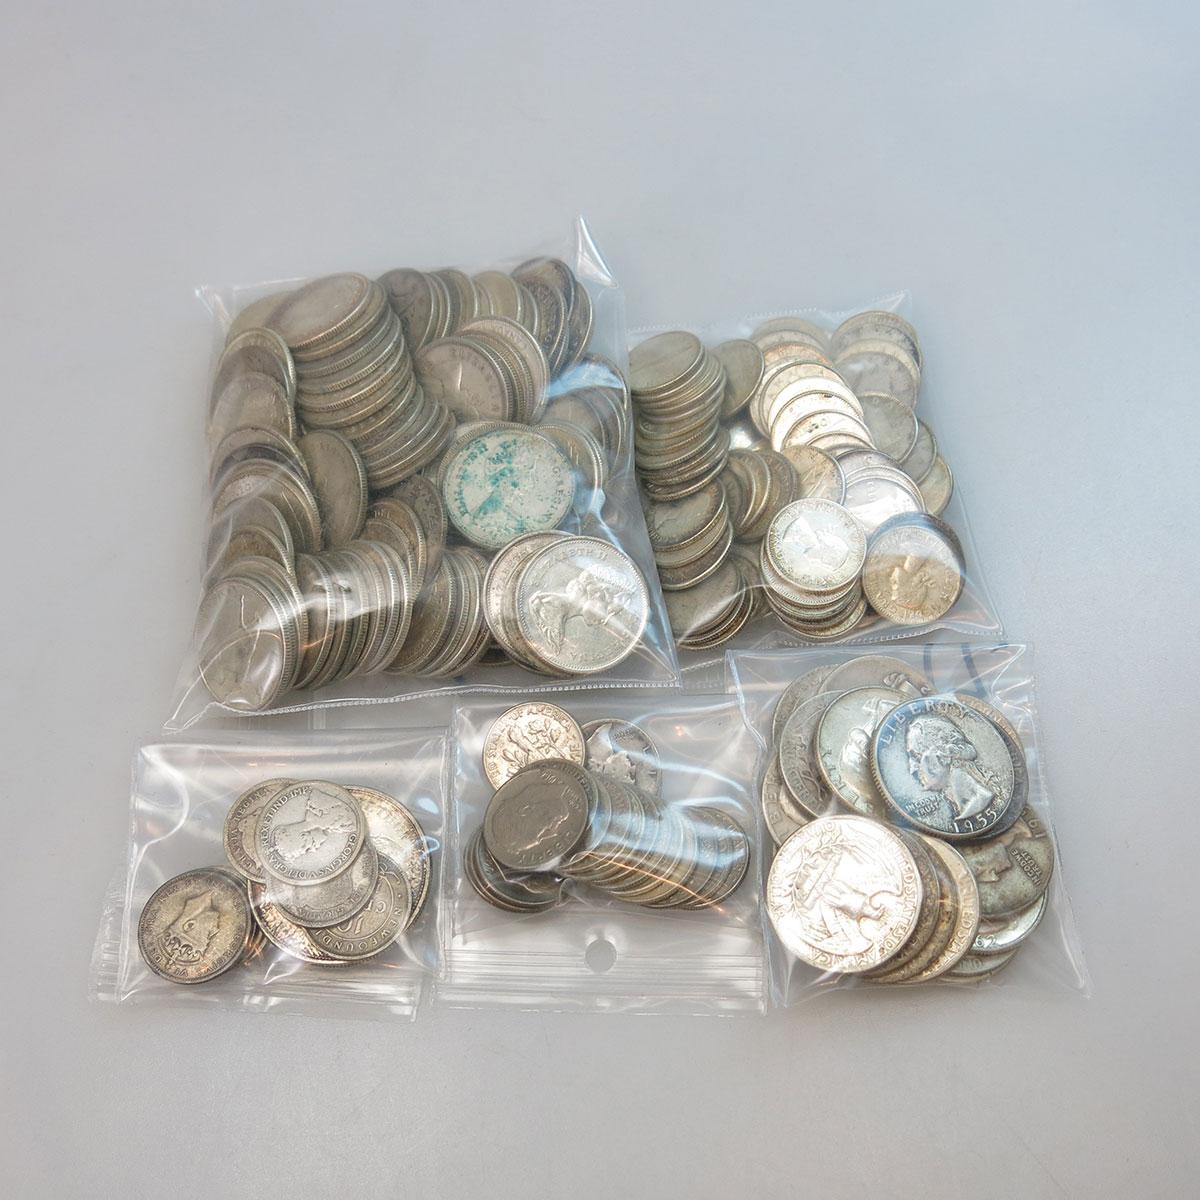 Quantity Of Canadian And American Silver Quarters And Dimes